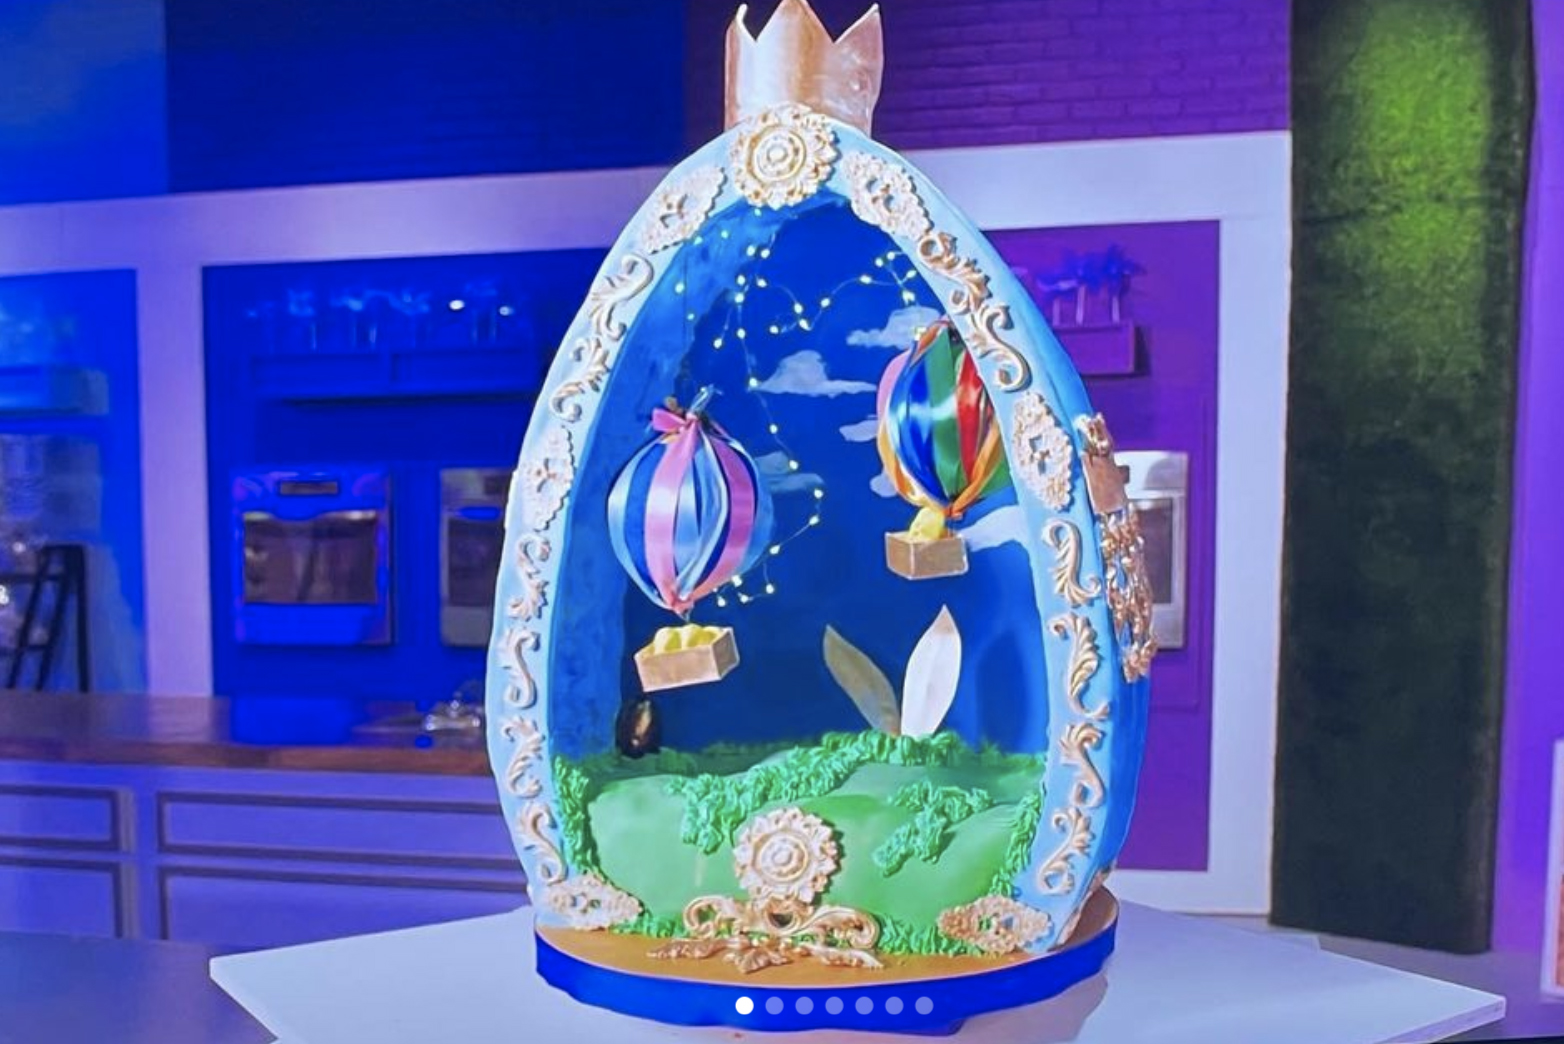 The epic Easter Egg that won the Food Network Easter Challenge. Photo: Food Network